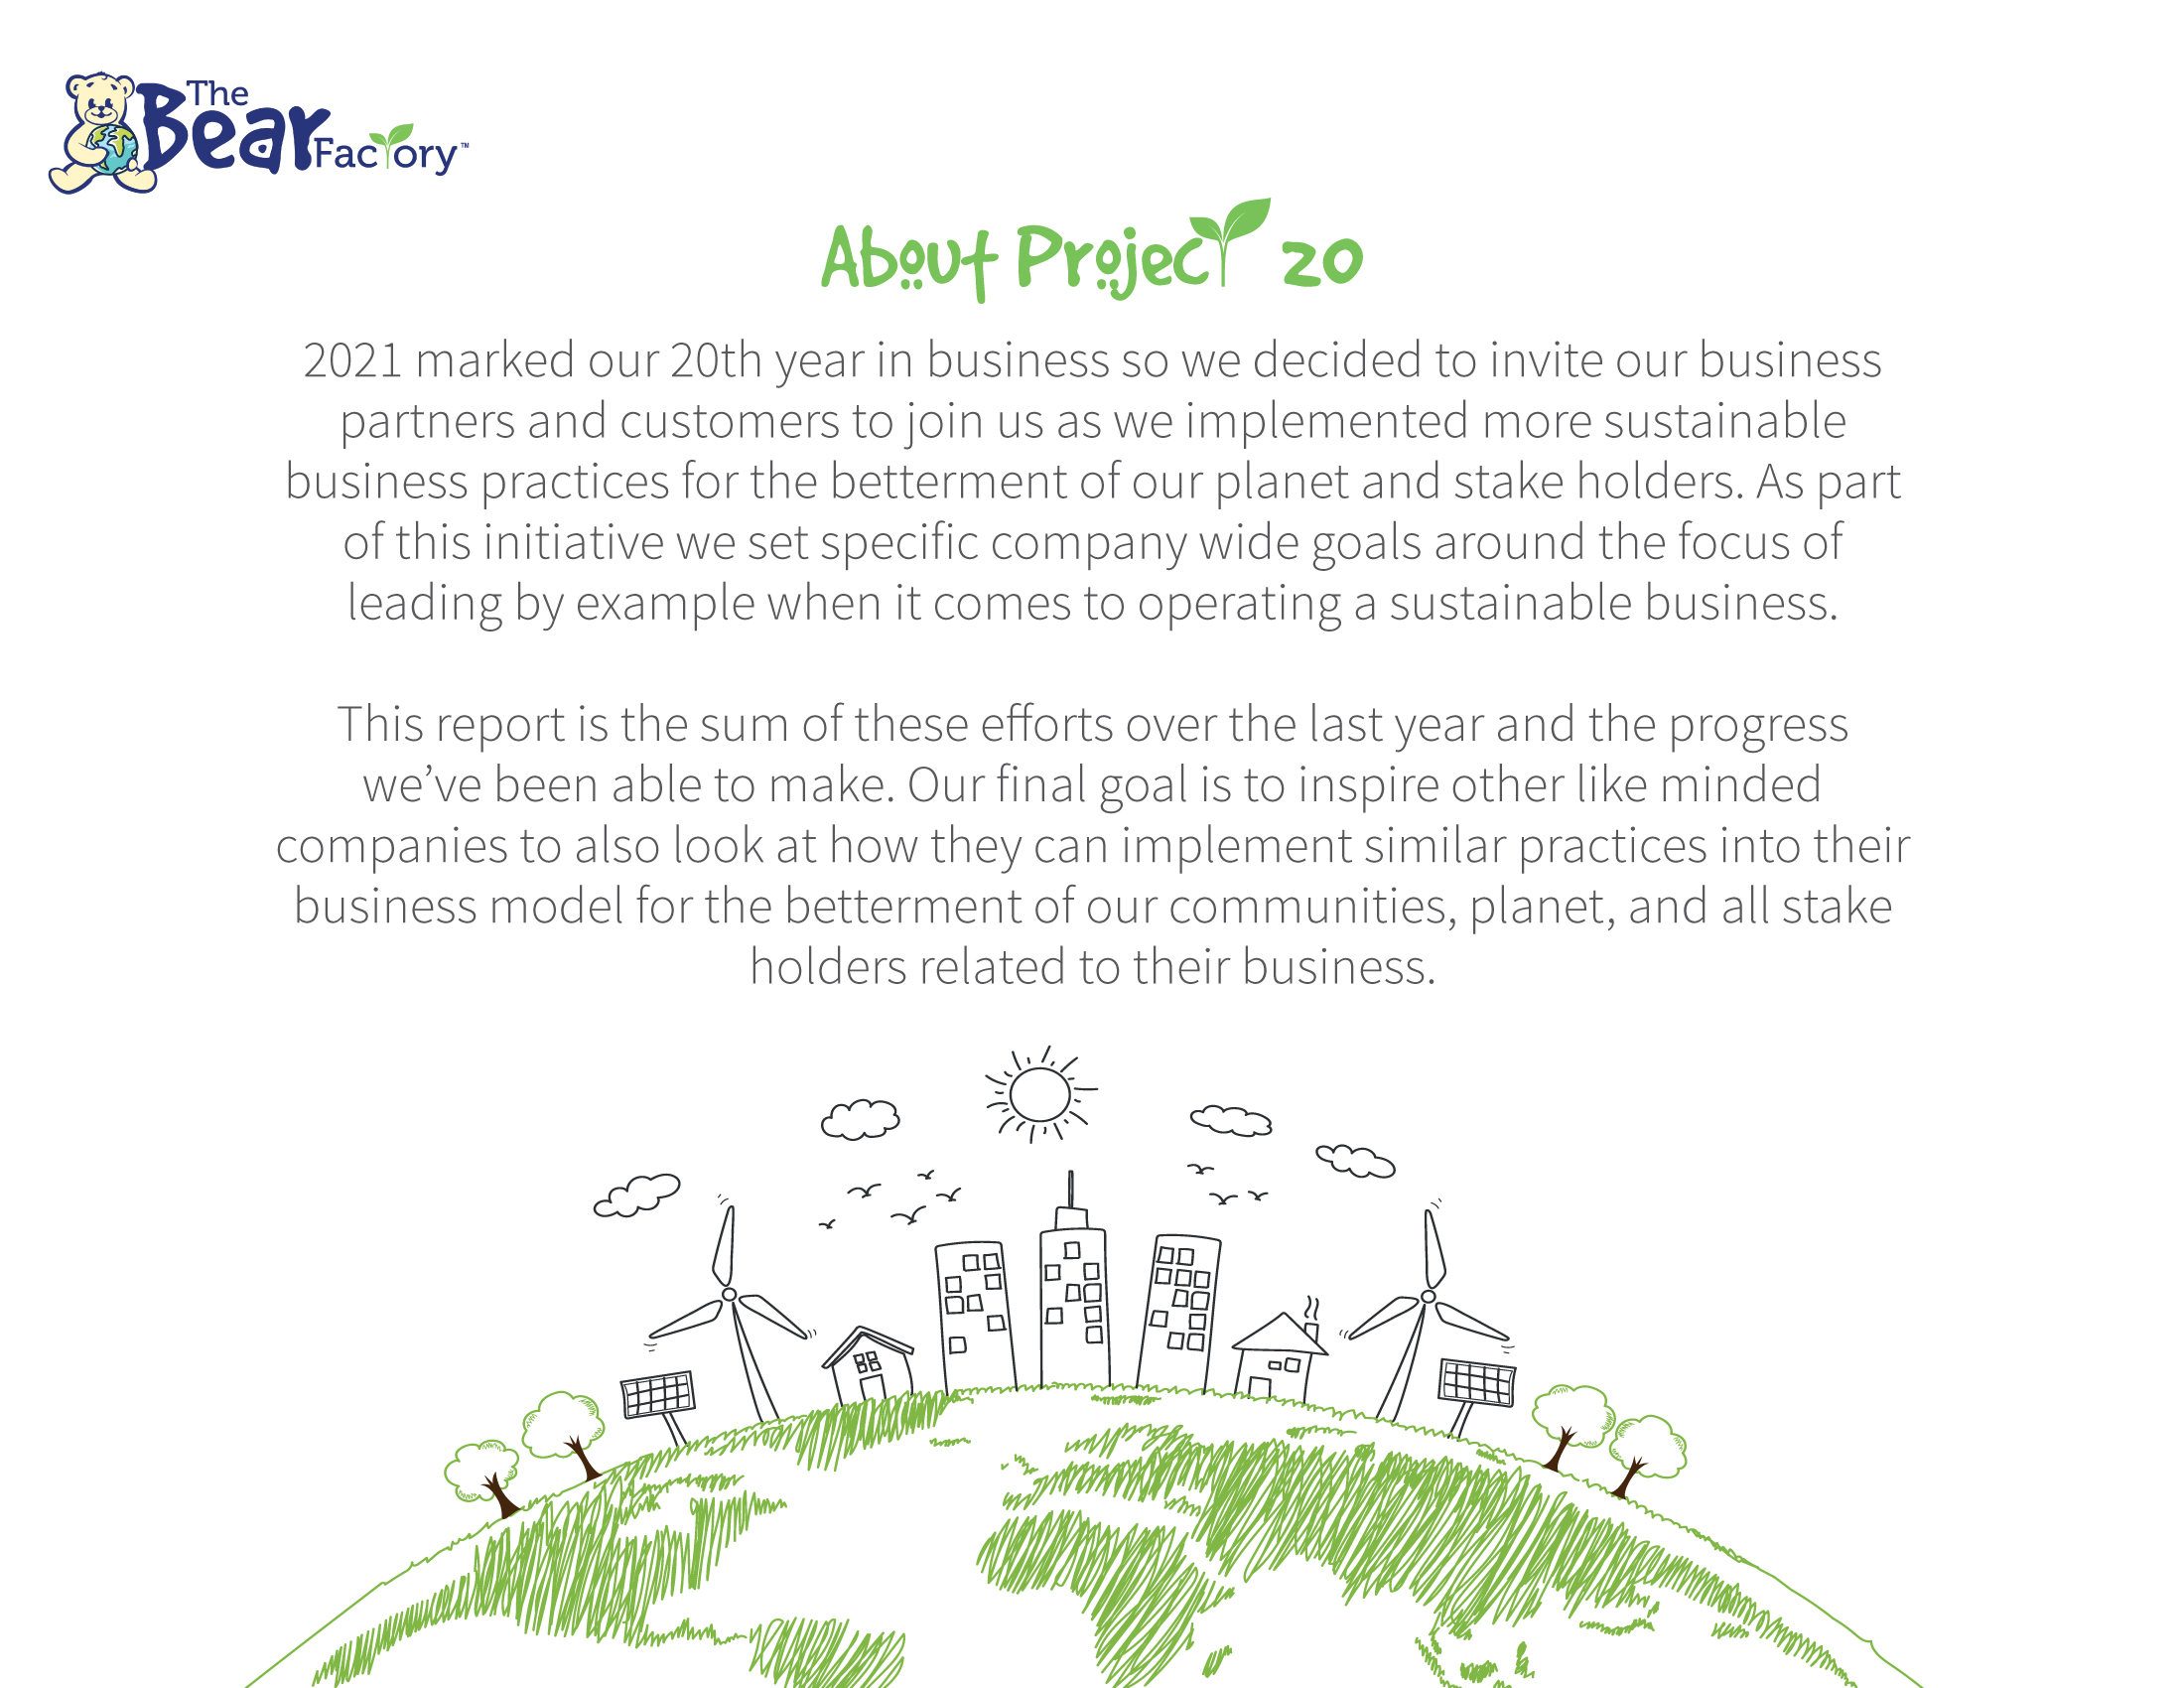 2021 marked our 20th year in business so we decided to invite our business partners and customers to join us as we implemented more sustainable business practices for the betterment of our planet and stake holders. As part of this initiative we set specific company wide goals around the focus of leading by example when it comes to operating a sustainable business. This report is the sum of these efforts over the last year and the progress we've been able to make. Our final goal is to inspire other like minded companies to also look at how they can implement similar practices into their business model for the betterment of our communities, planet, and all stake holders related to their business.